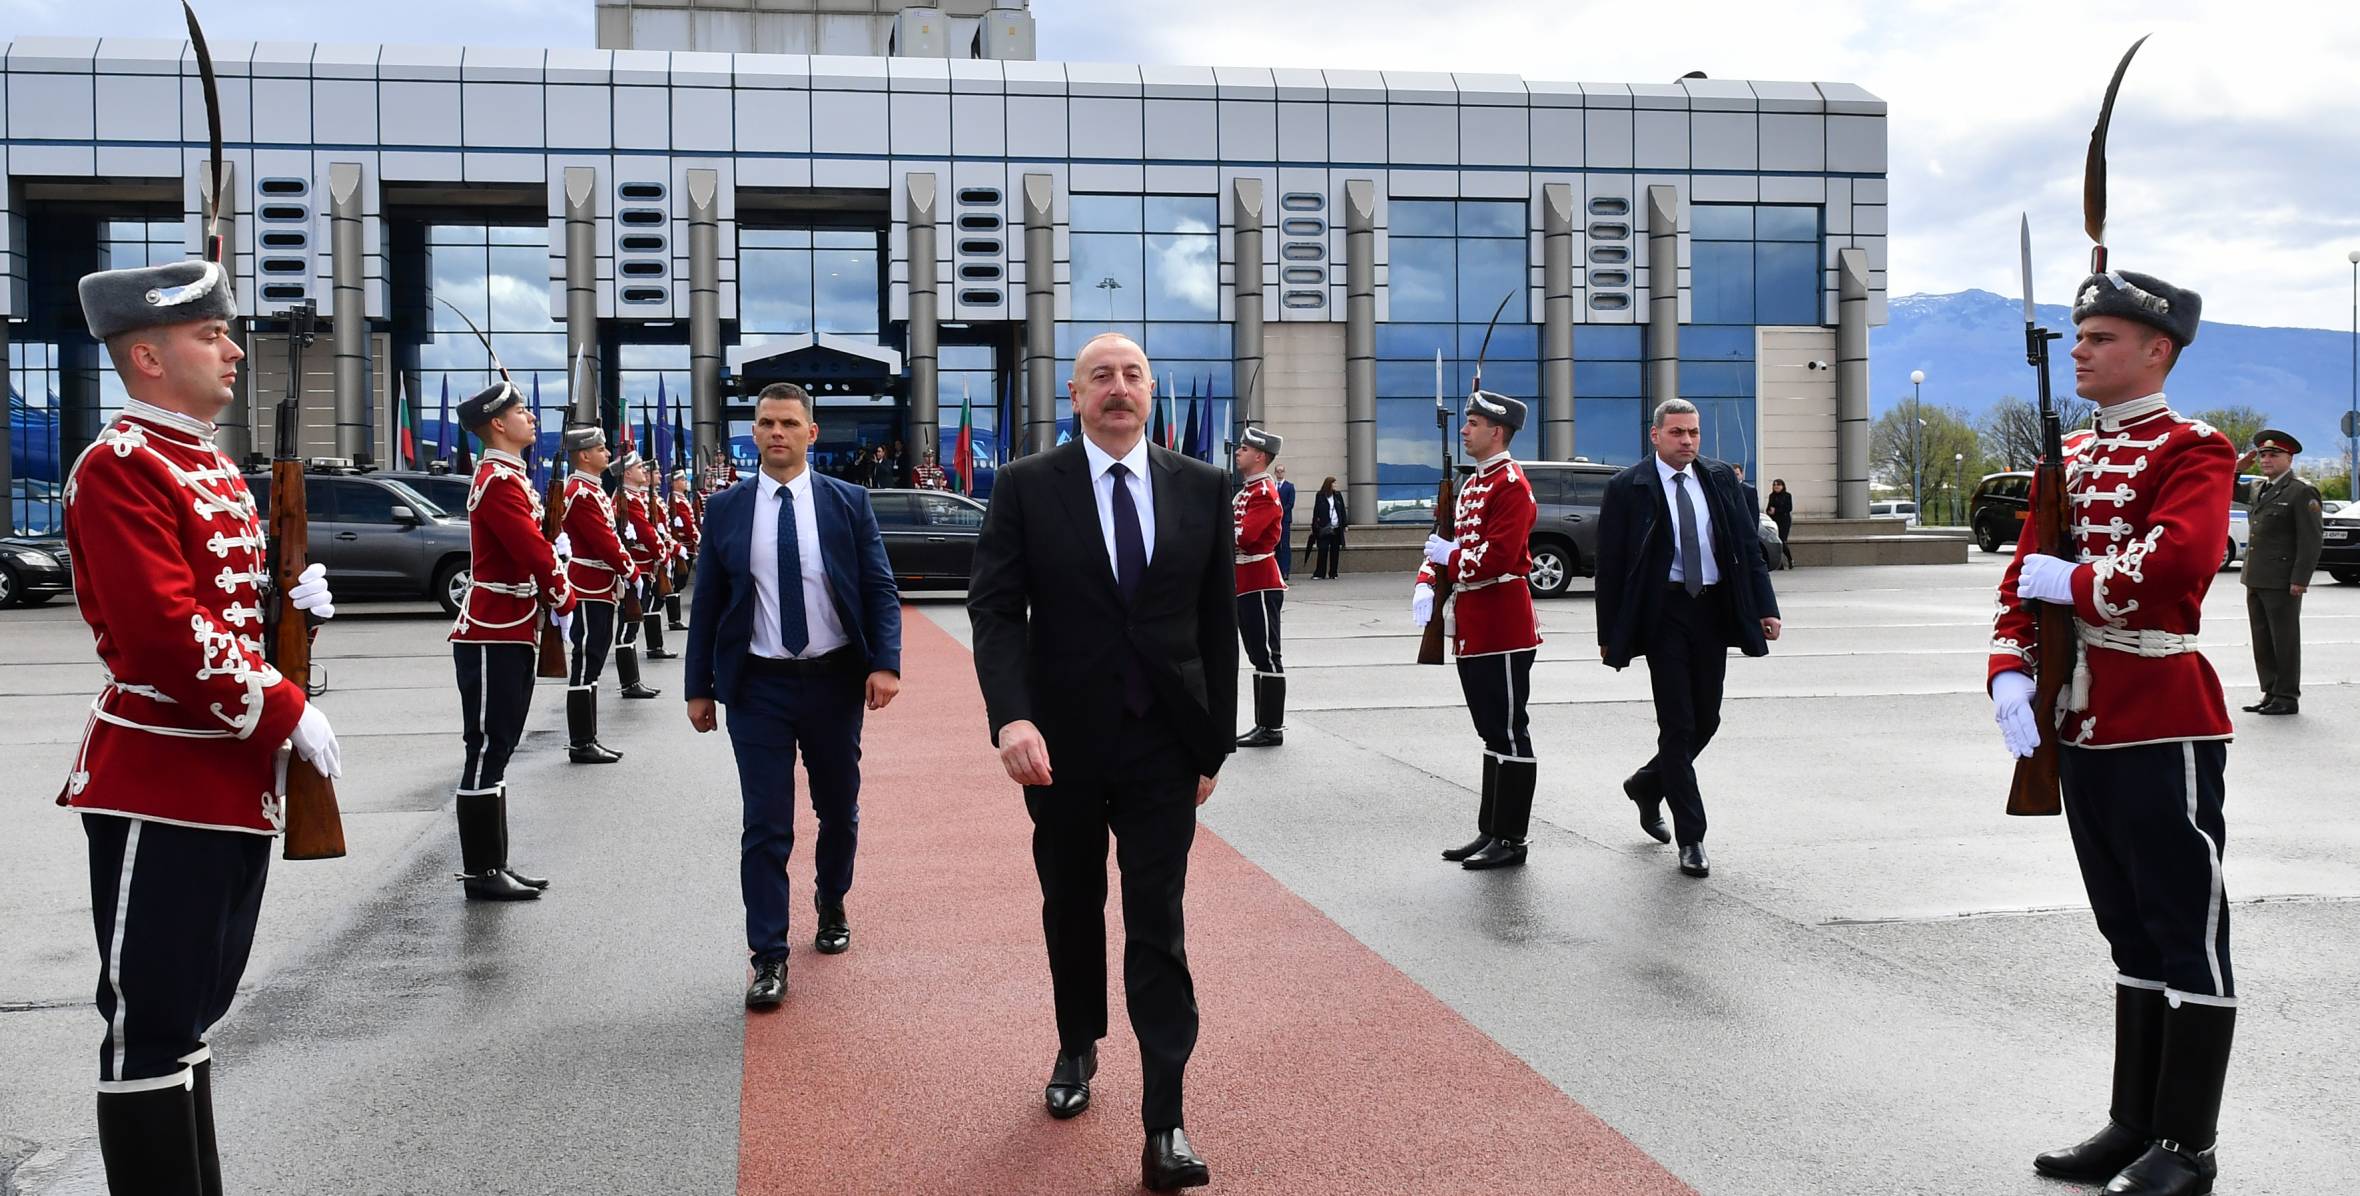 Ilham Aliyev concluded his working visit to Bulgaria